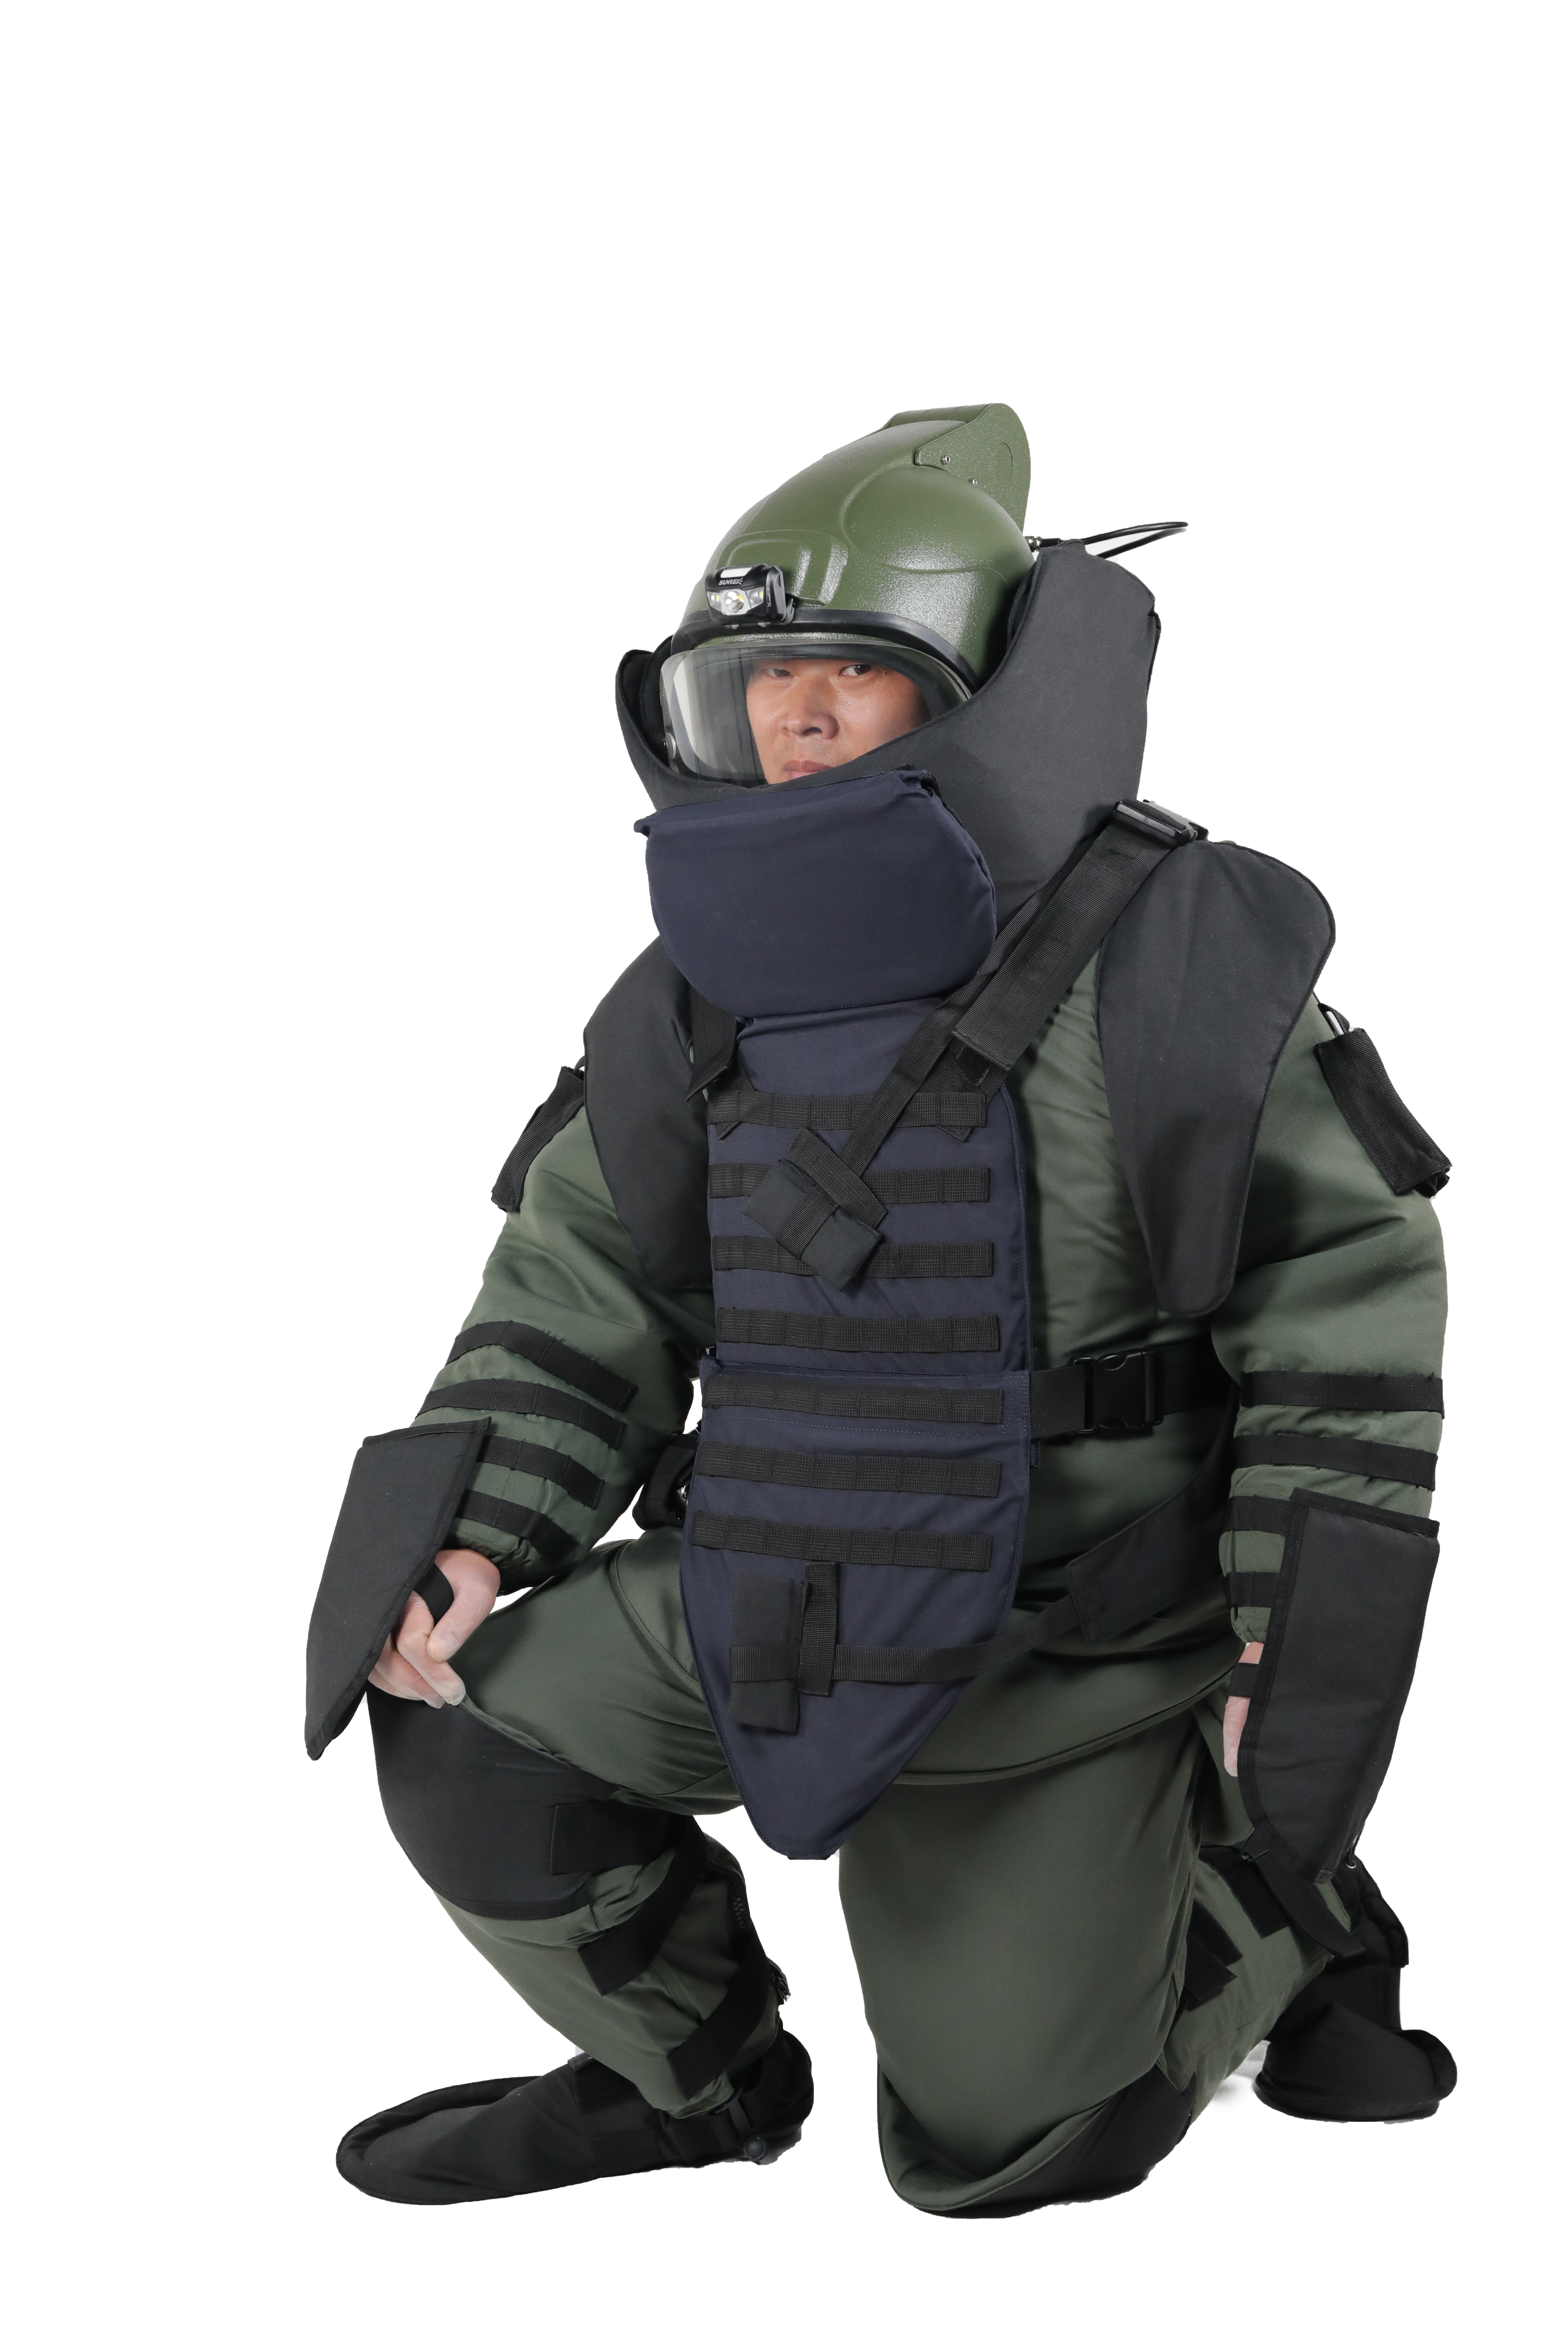 Special Price for Prodder Tool - Police Military Security EOD bomb disposal suit – Heweiyongtai